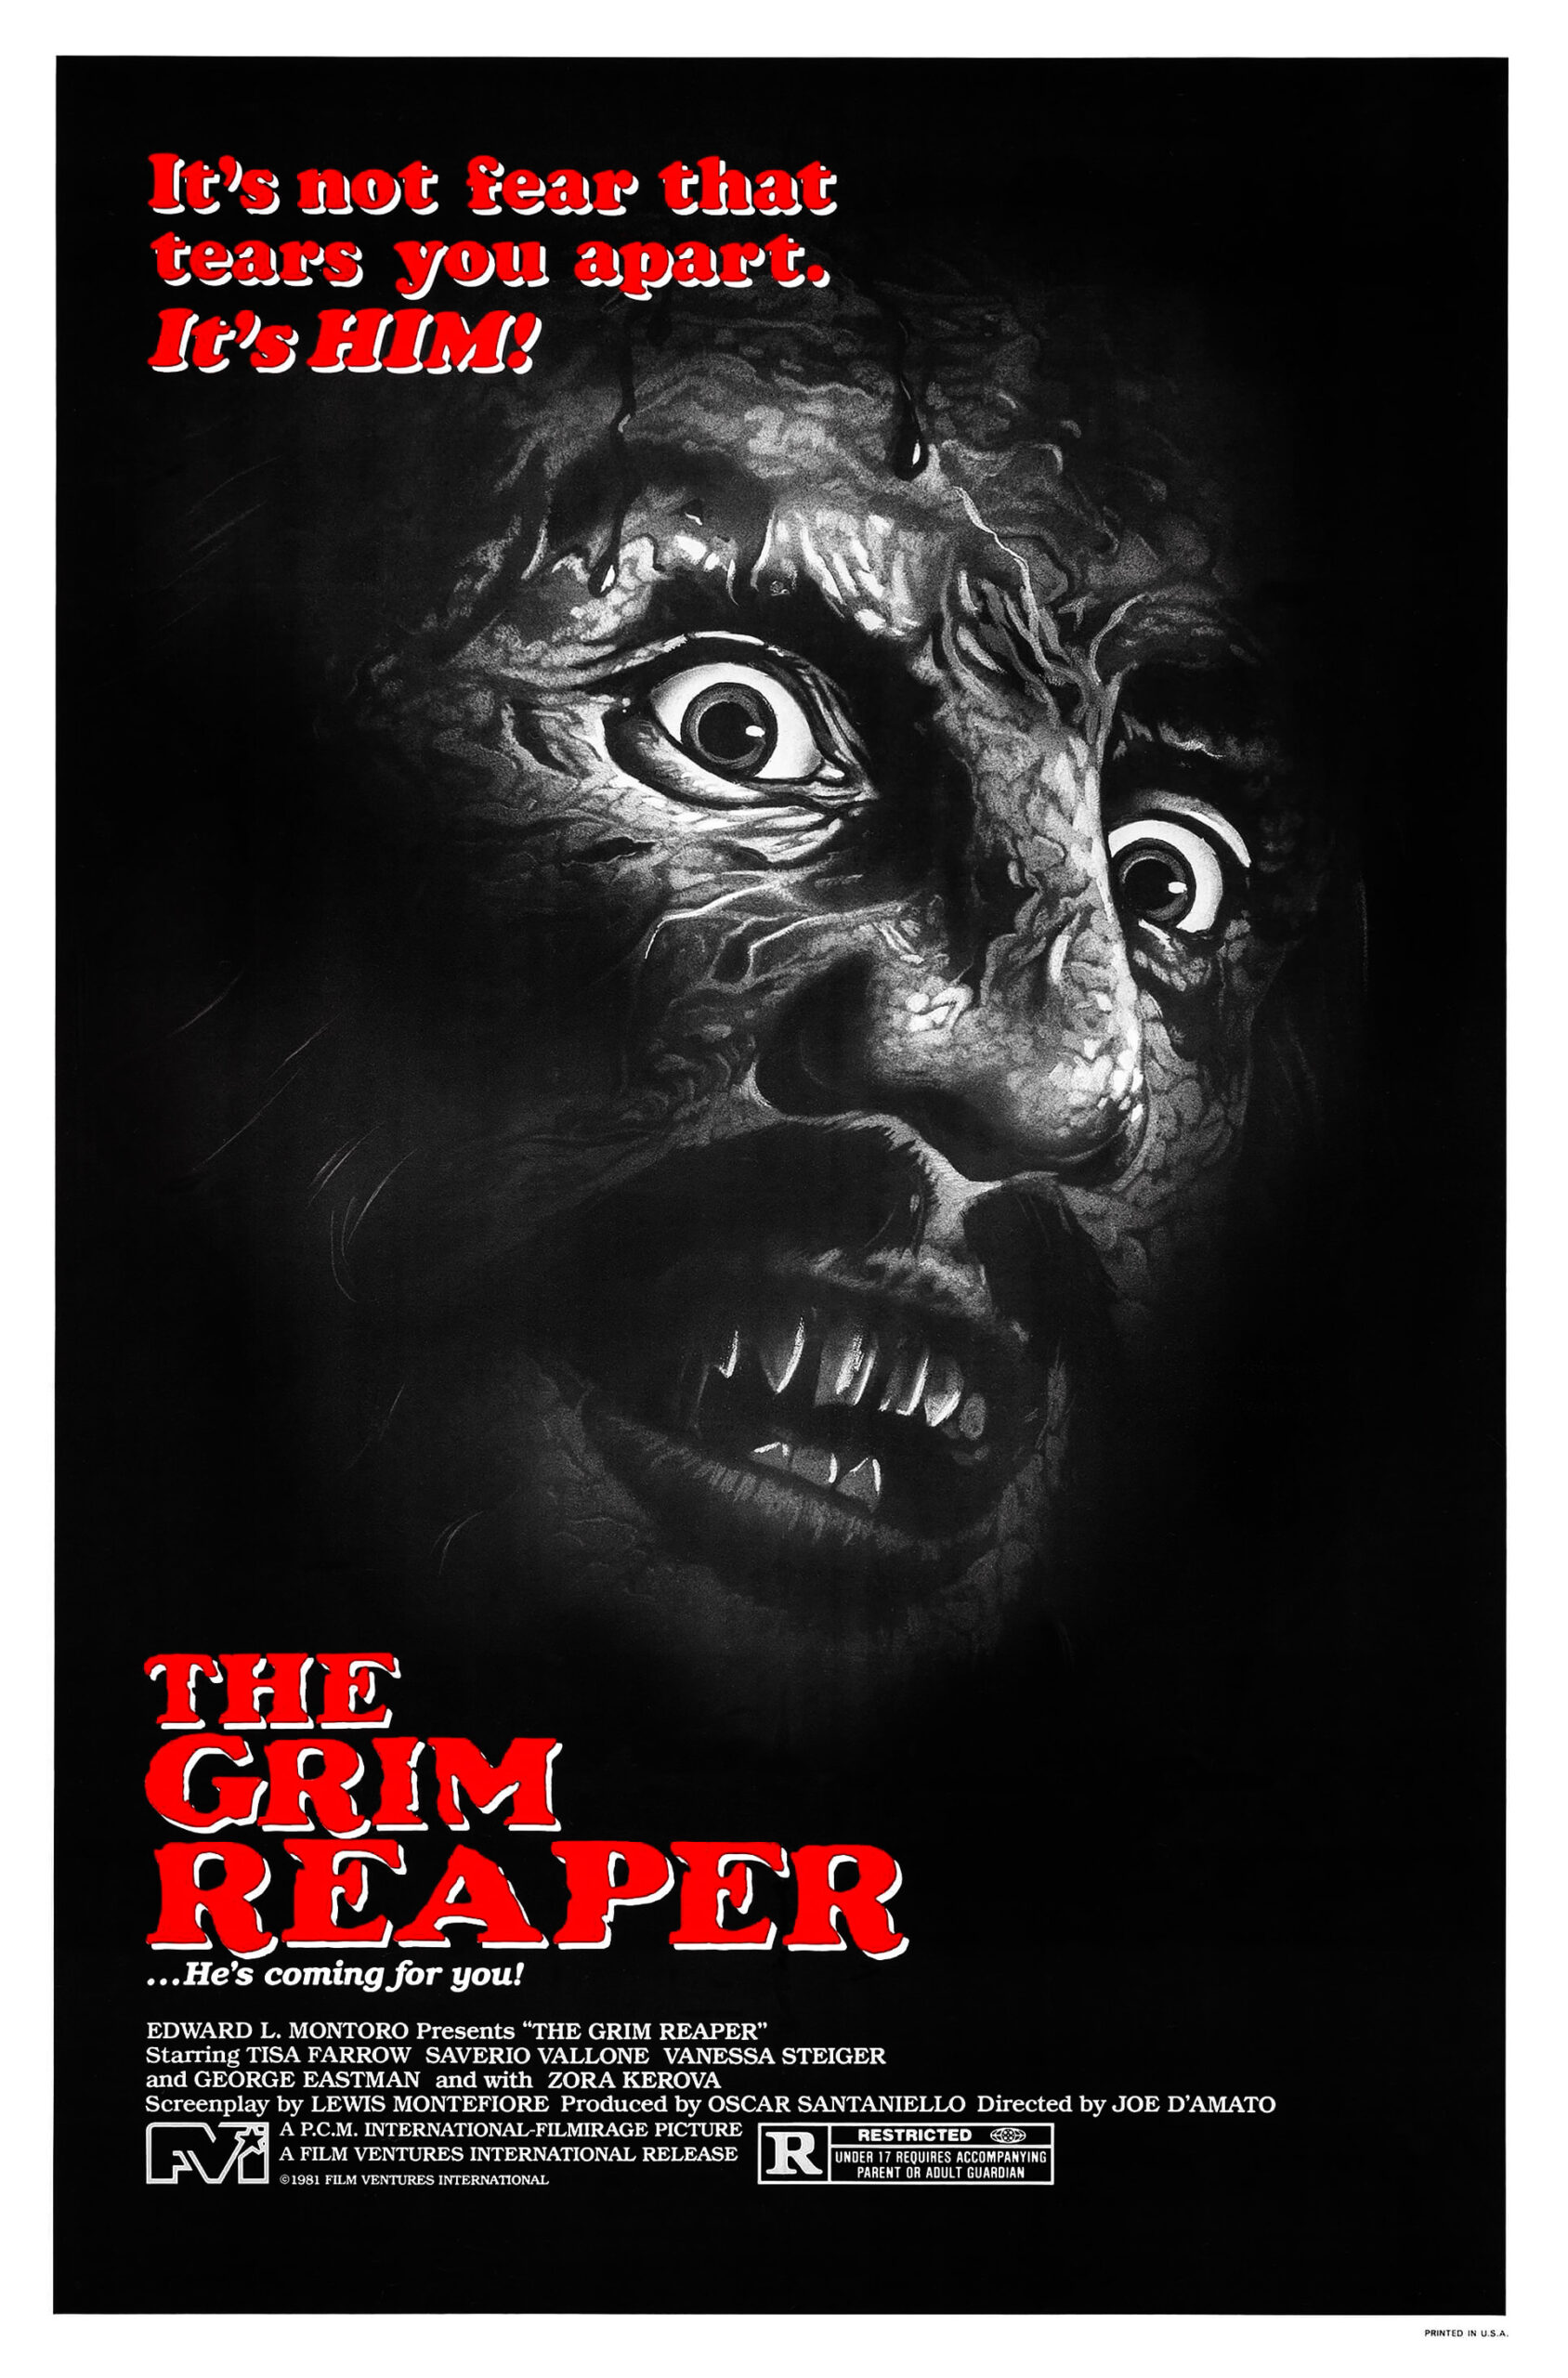 31 Days Of Horror: Day 12 ‘The Grim Reaper’Directed by: Joe D’Amato